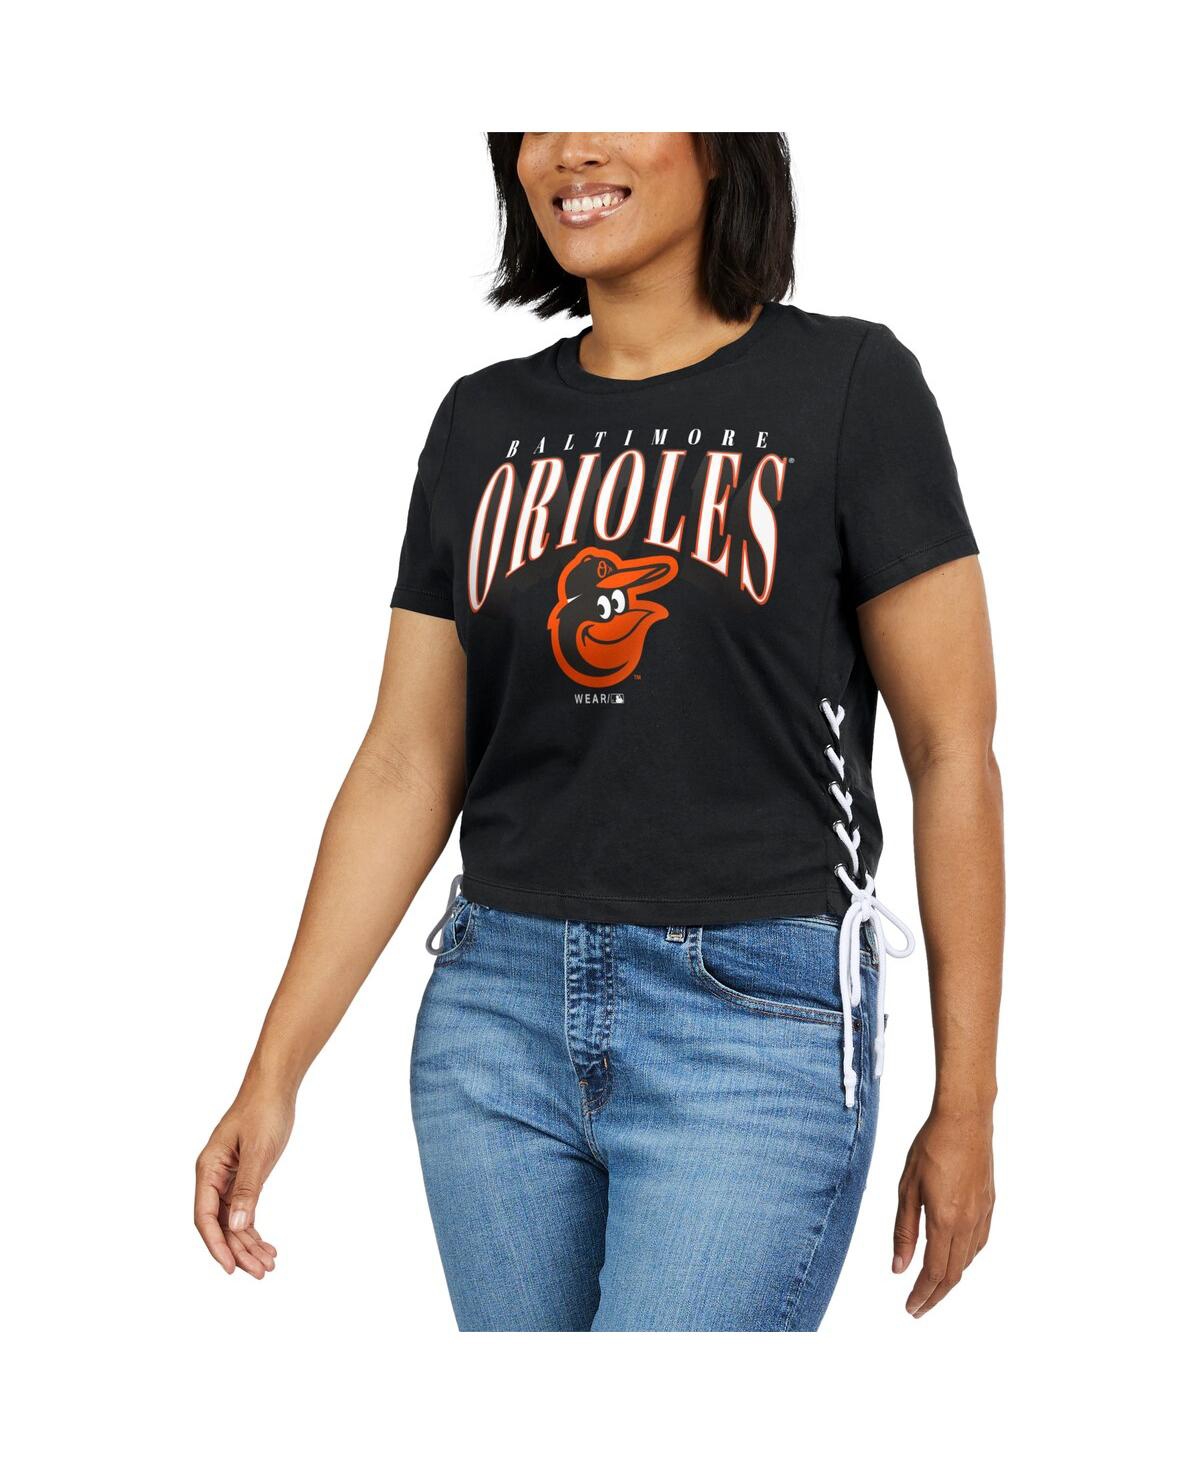 Shop Wear By Erin Andrews Women's  Black Baltimore Orioles Side Lace-up Cropped T-shirt